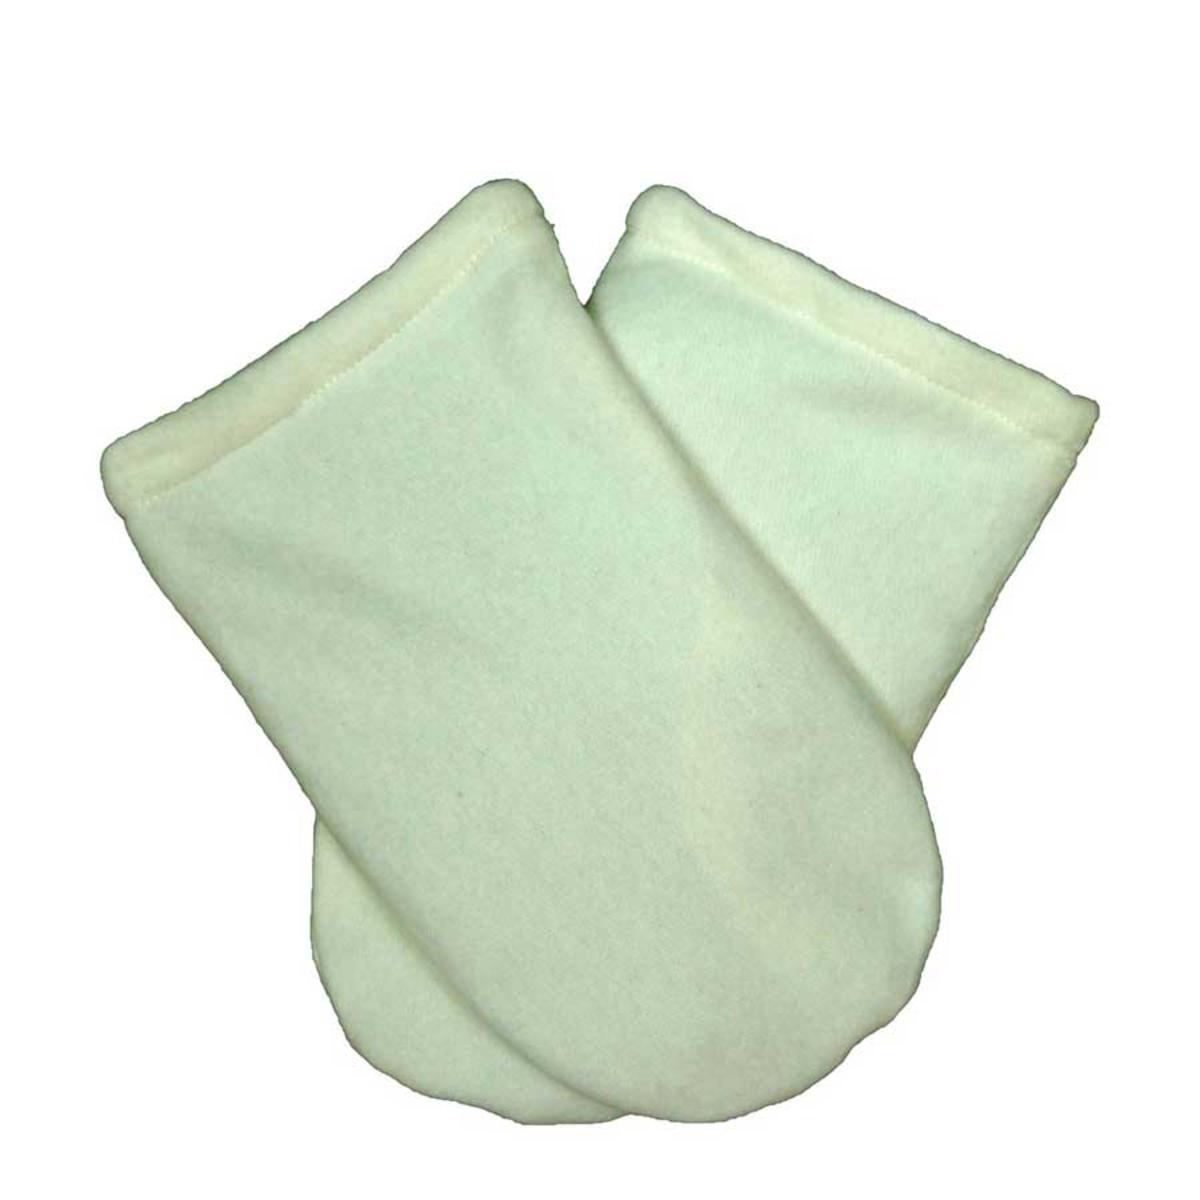 Herbal Concepts Organic Comfort Mitts